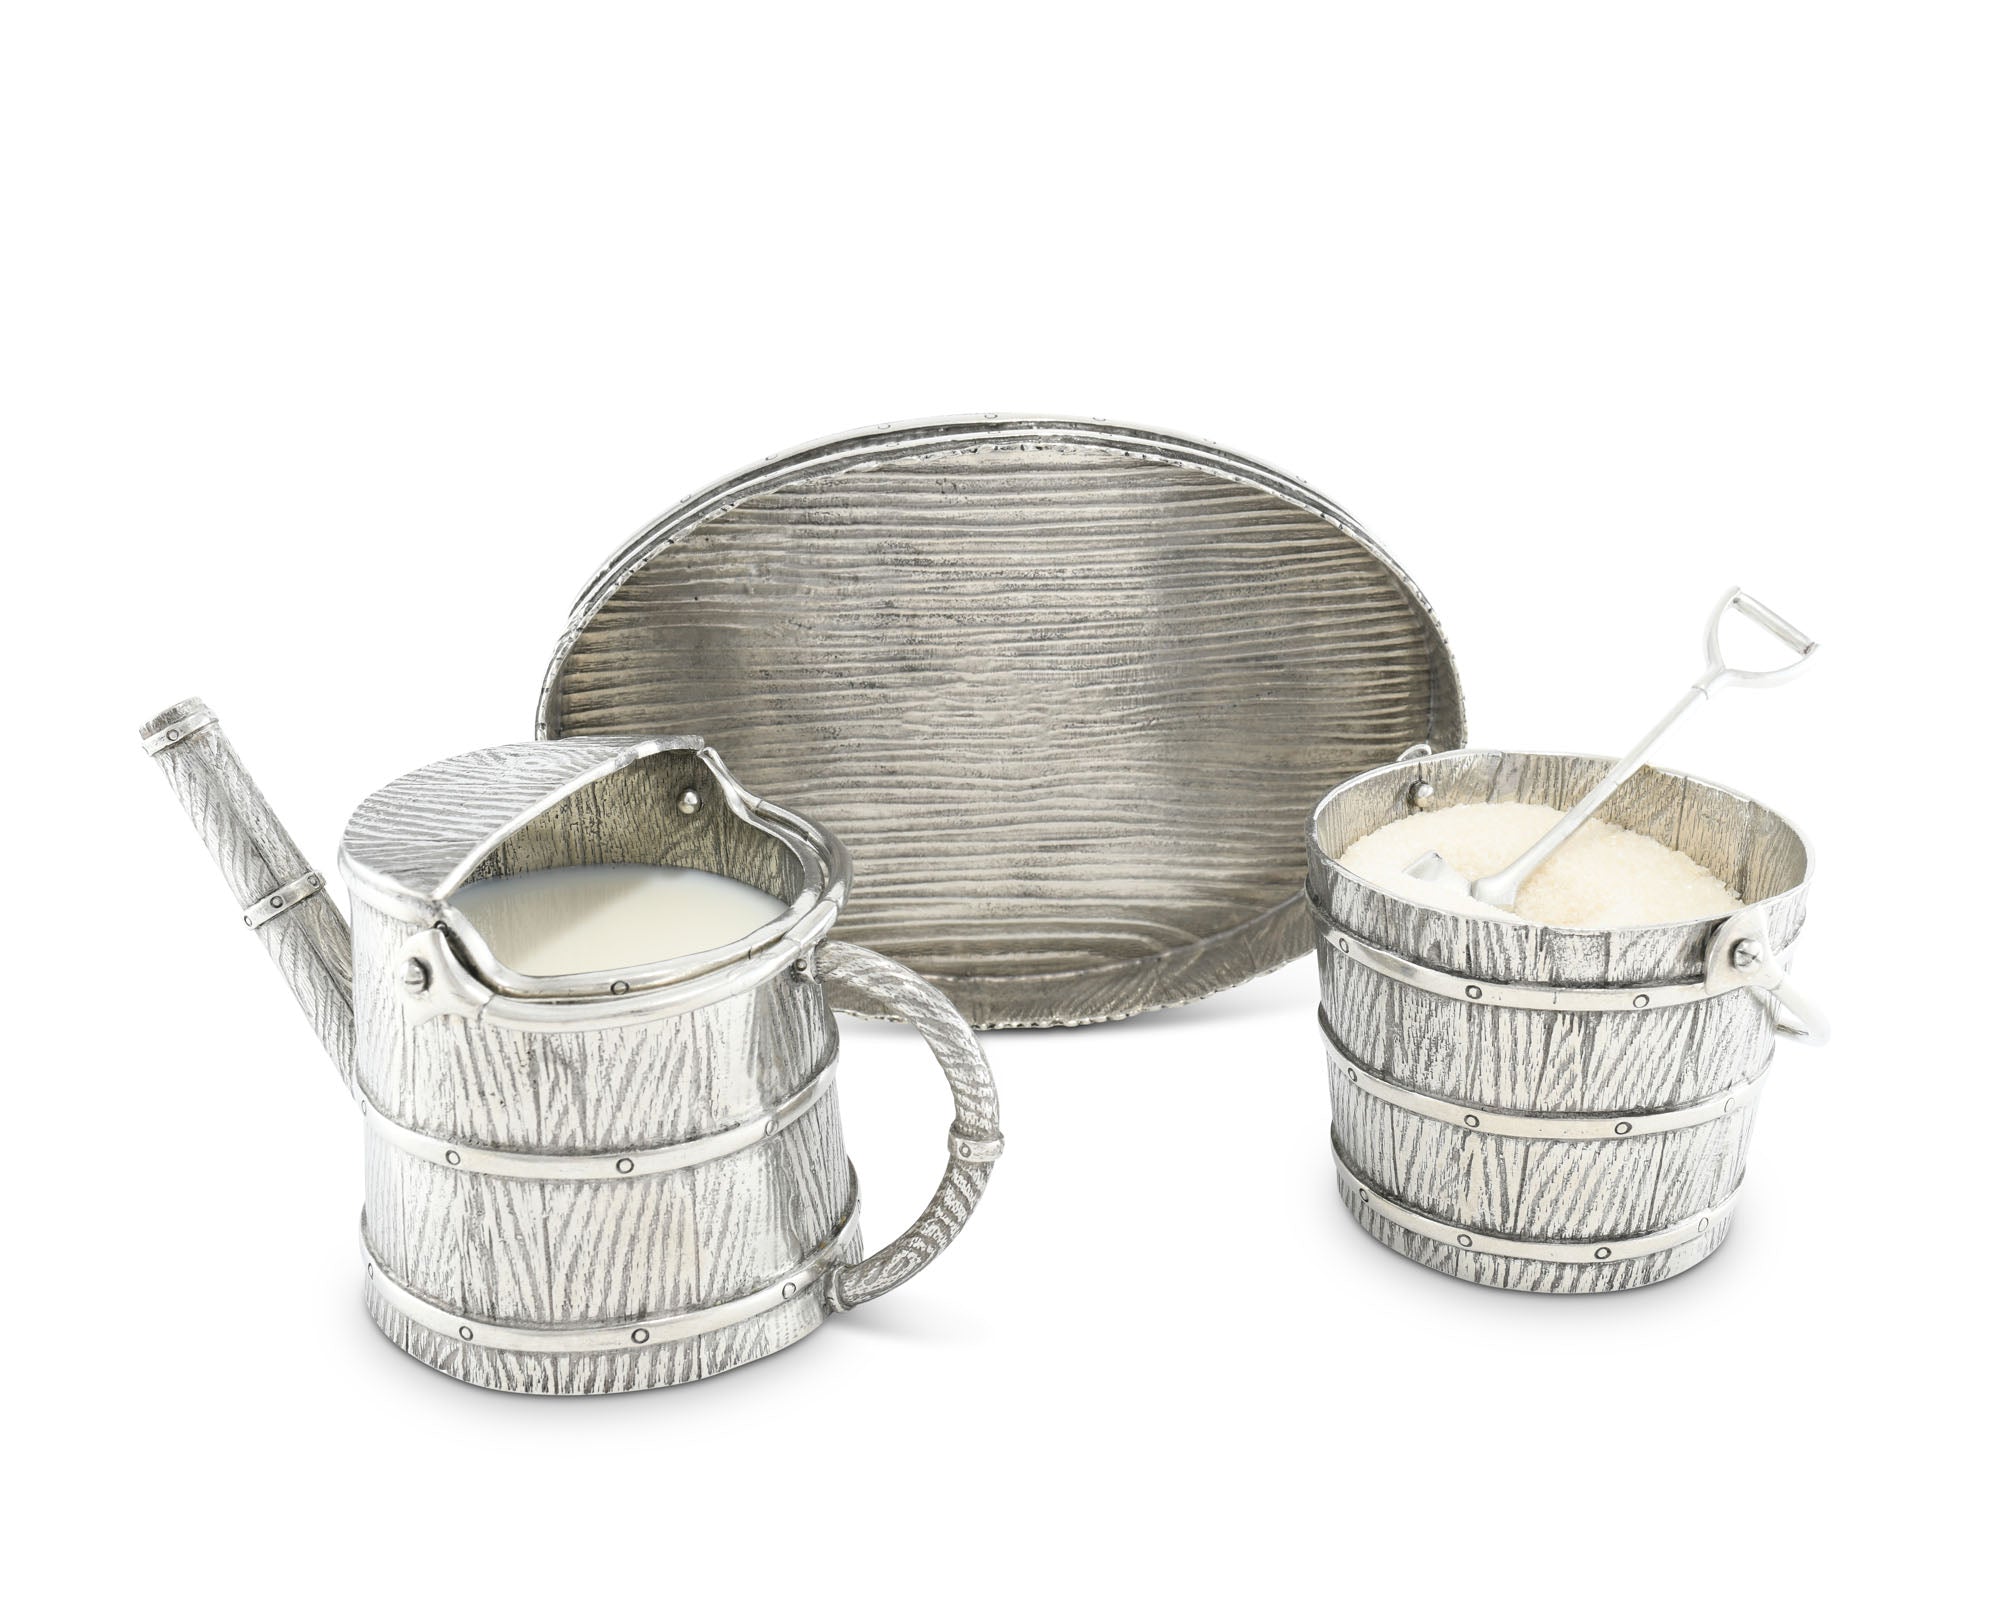 Vagabond House Watering Can Creamer Set Product Image